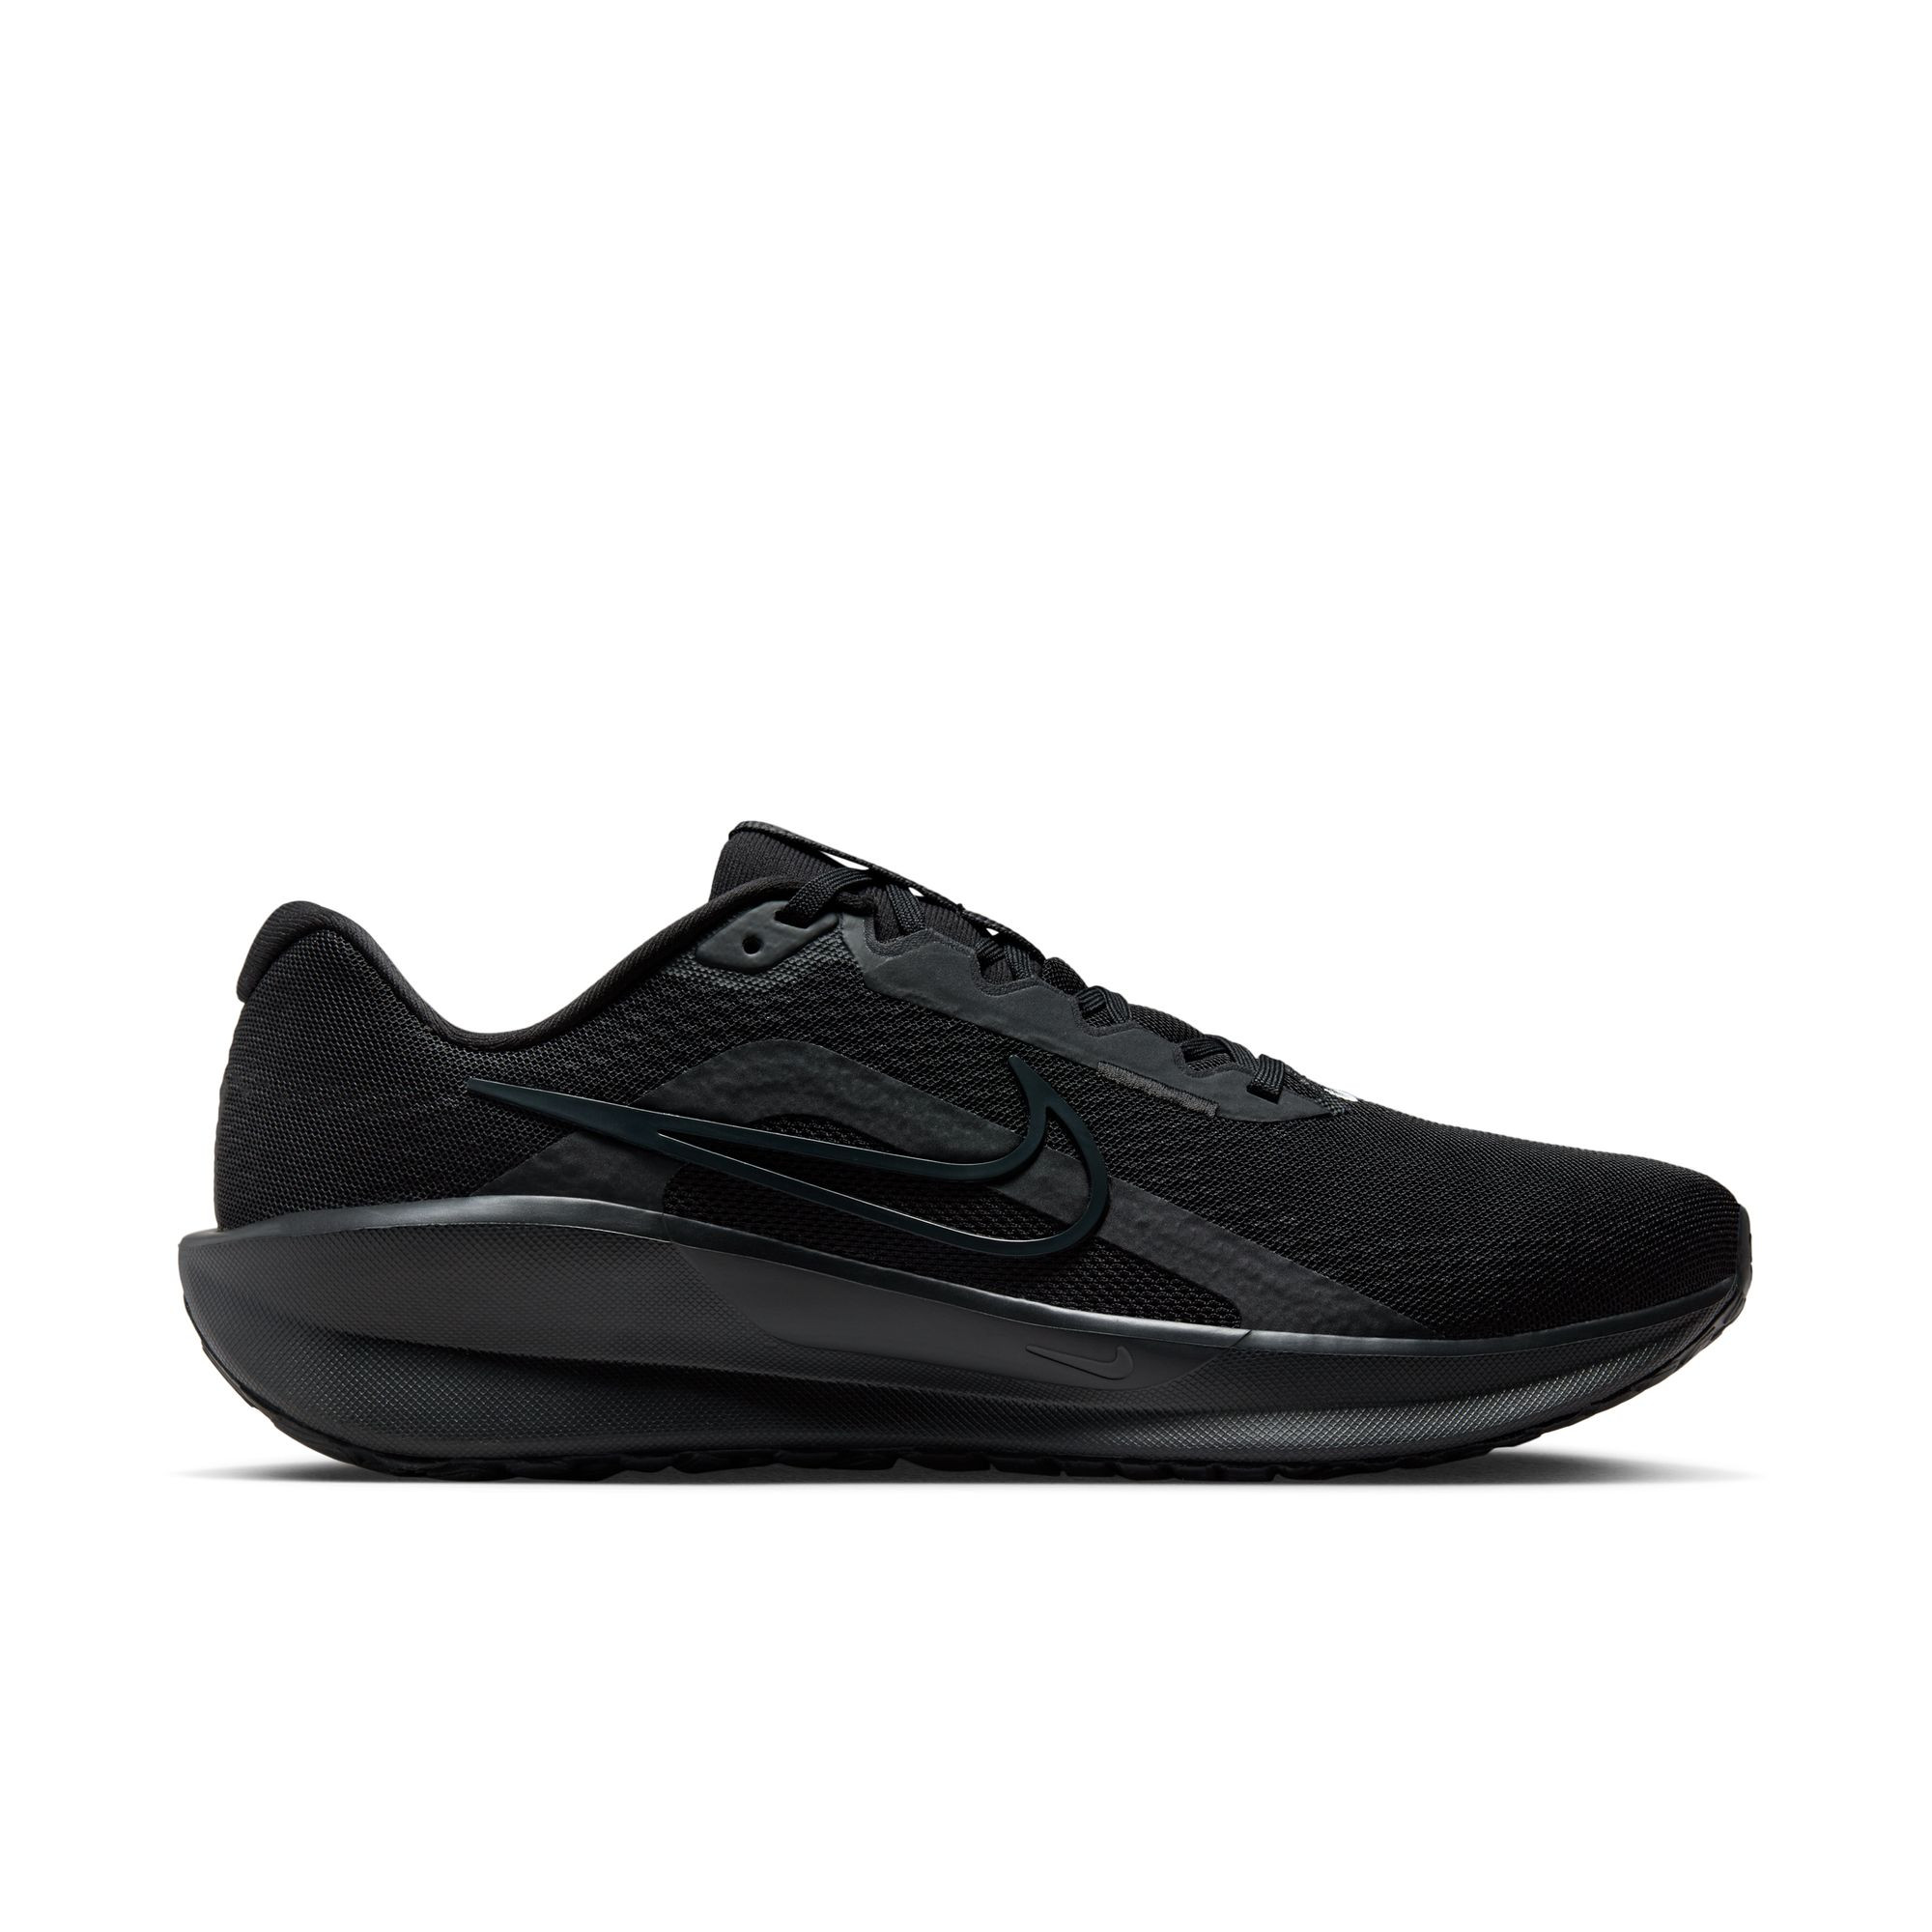 Nike Downshifter 13 Men's Running Shoes - Anthracite/Black-Wolf Gray